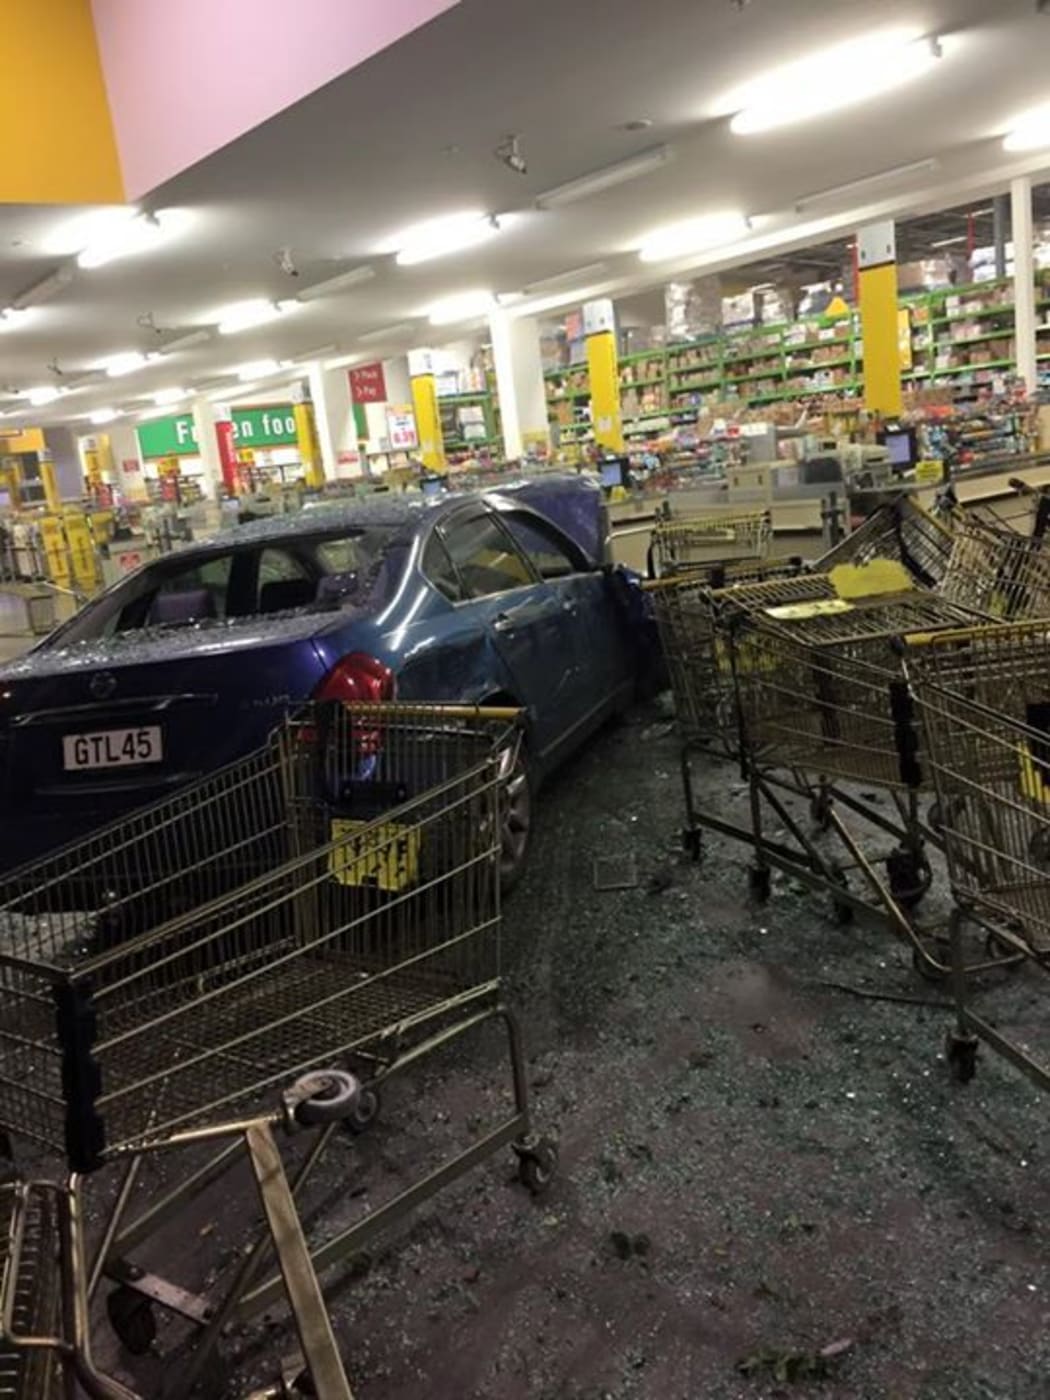 The car went through the supermarket window.